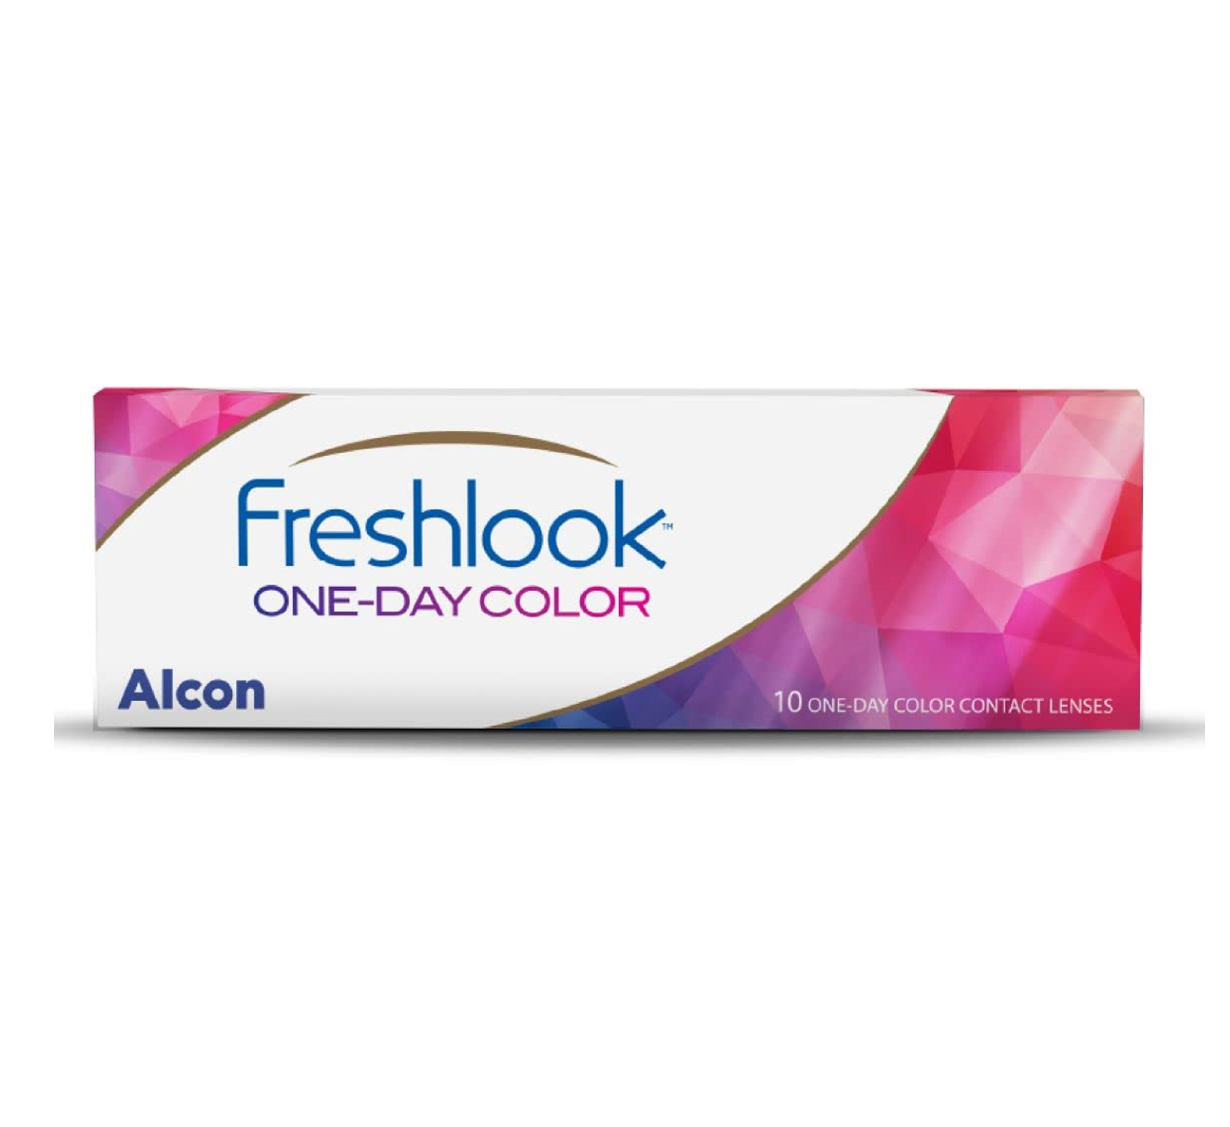 Freshlook 1 day color contact Lens (10 lens pack)